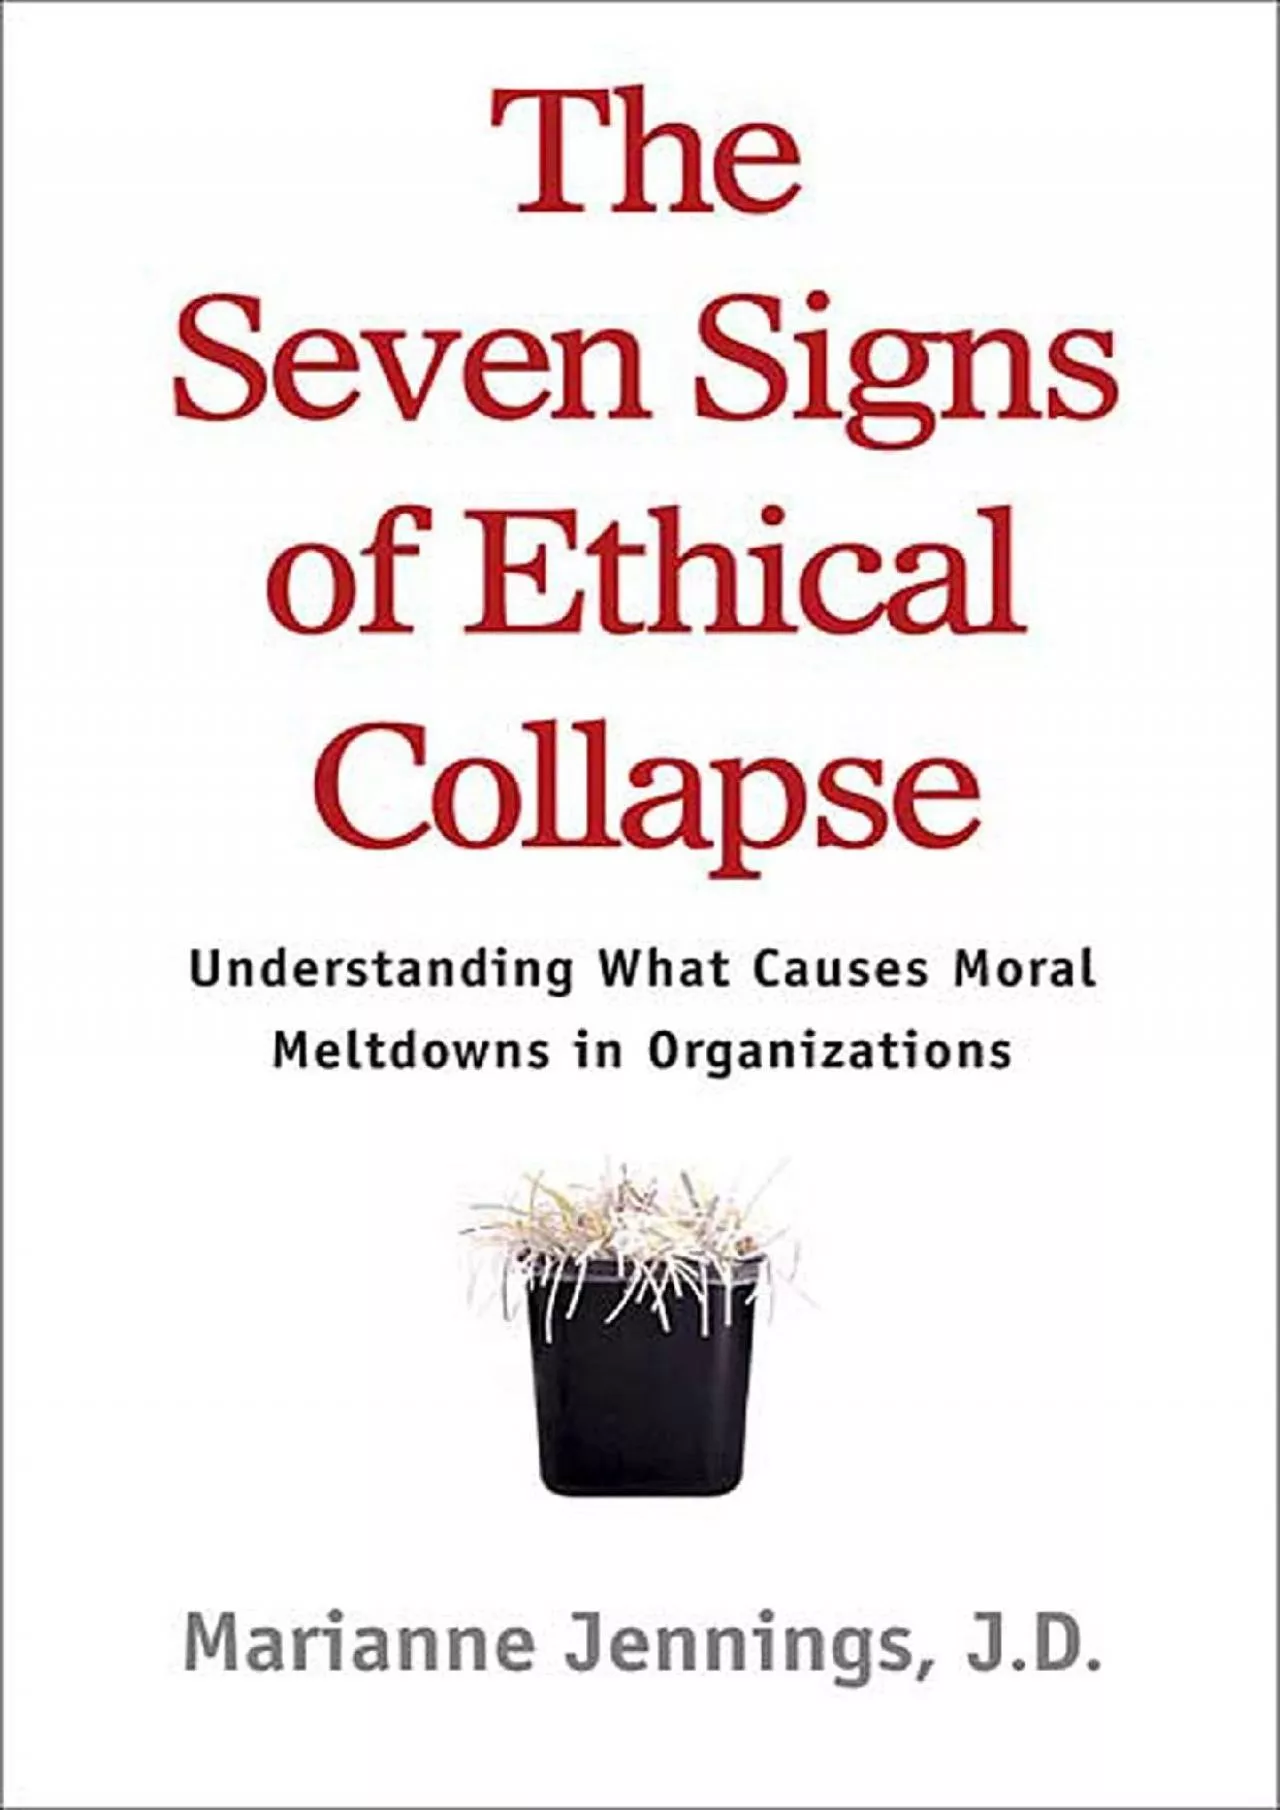 (EBOOK)-The Seven Signs of Ethical Collapse: How to Spot Moral Meltdowns in Companies...